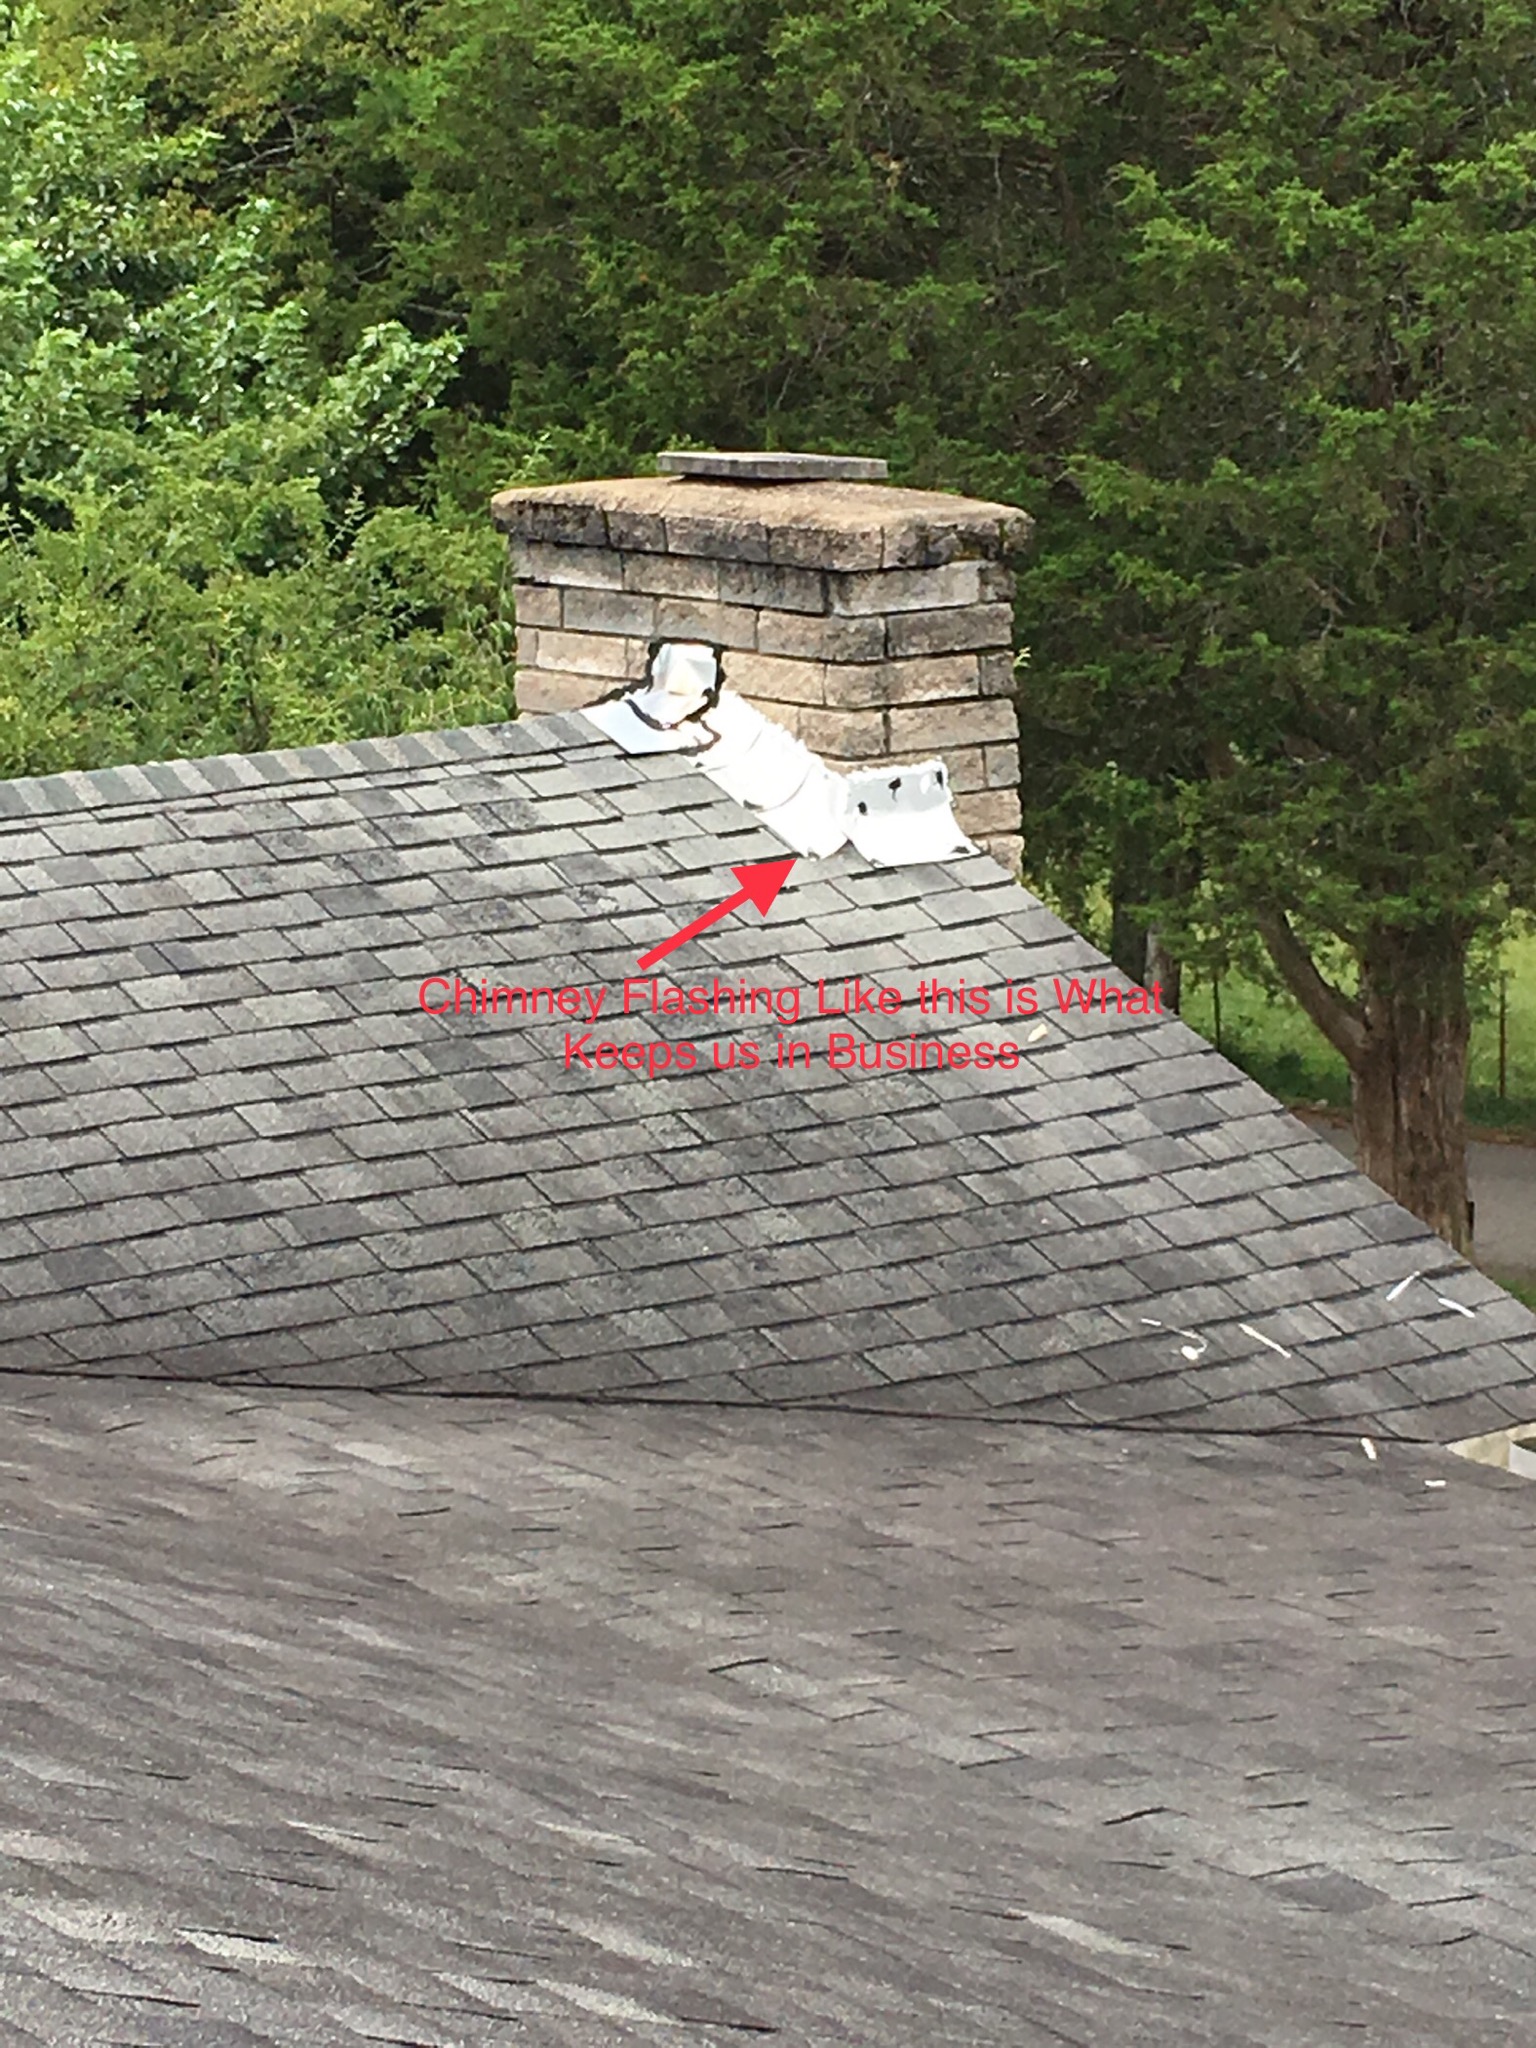 This is a view of chimney flashing that is not recommended.